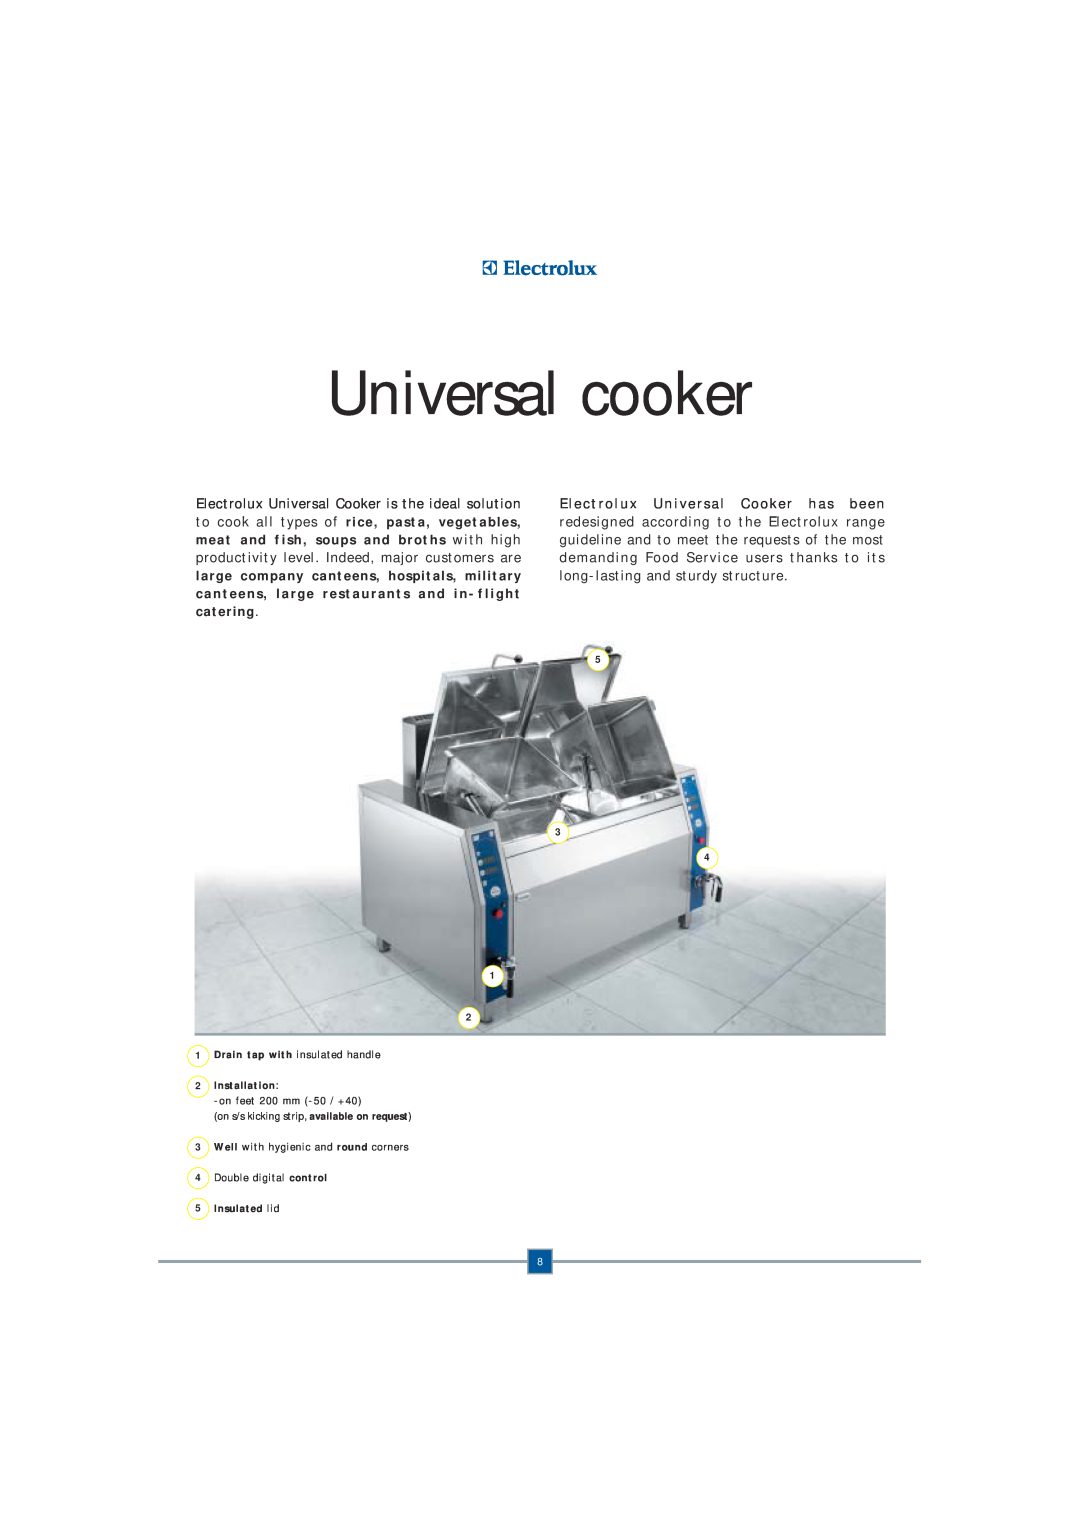 Electrolux Fryer manual Universal cooker, Installation, Insulated lid 